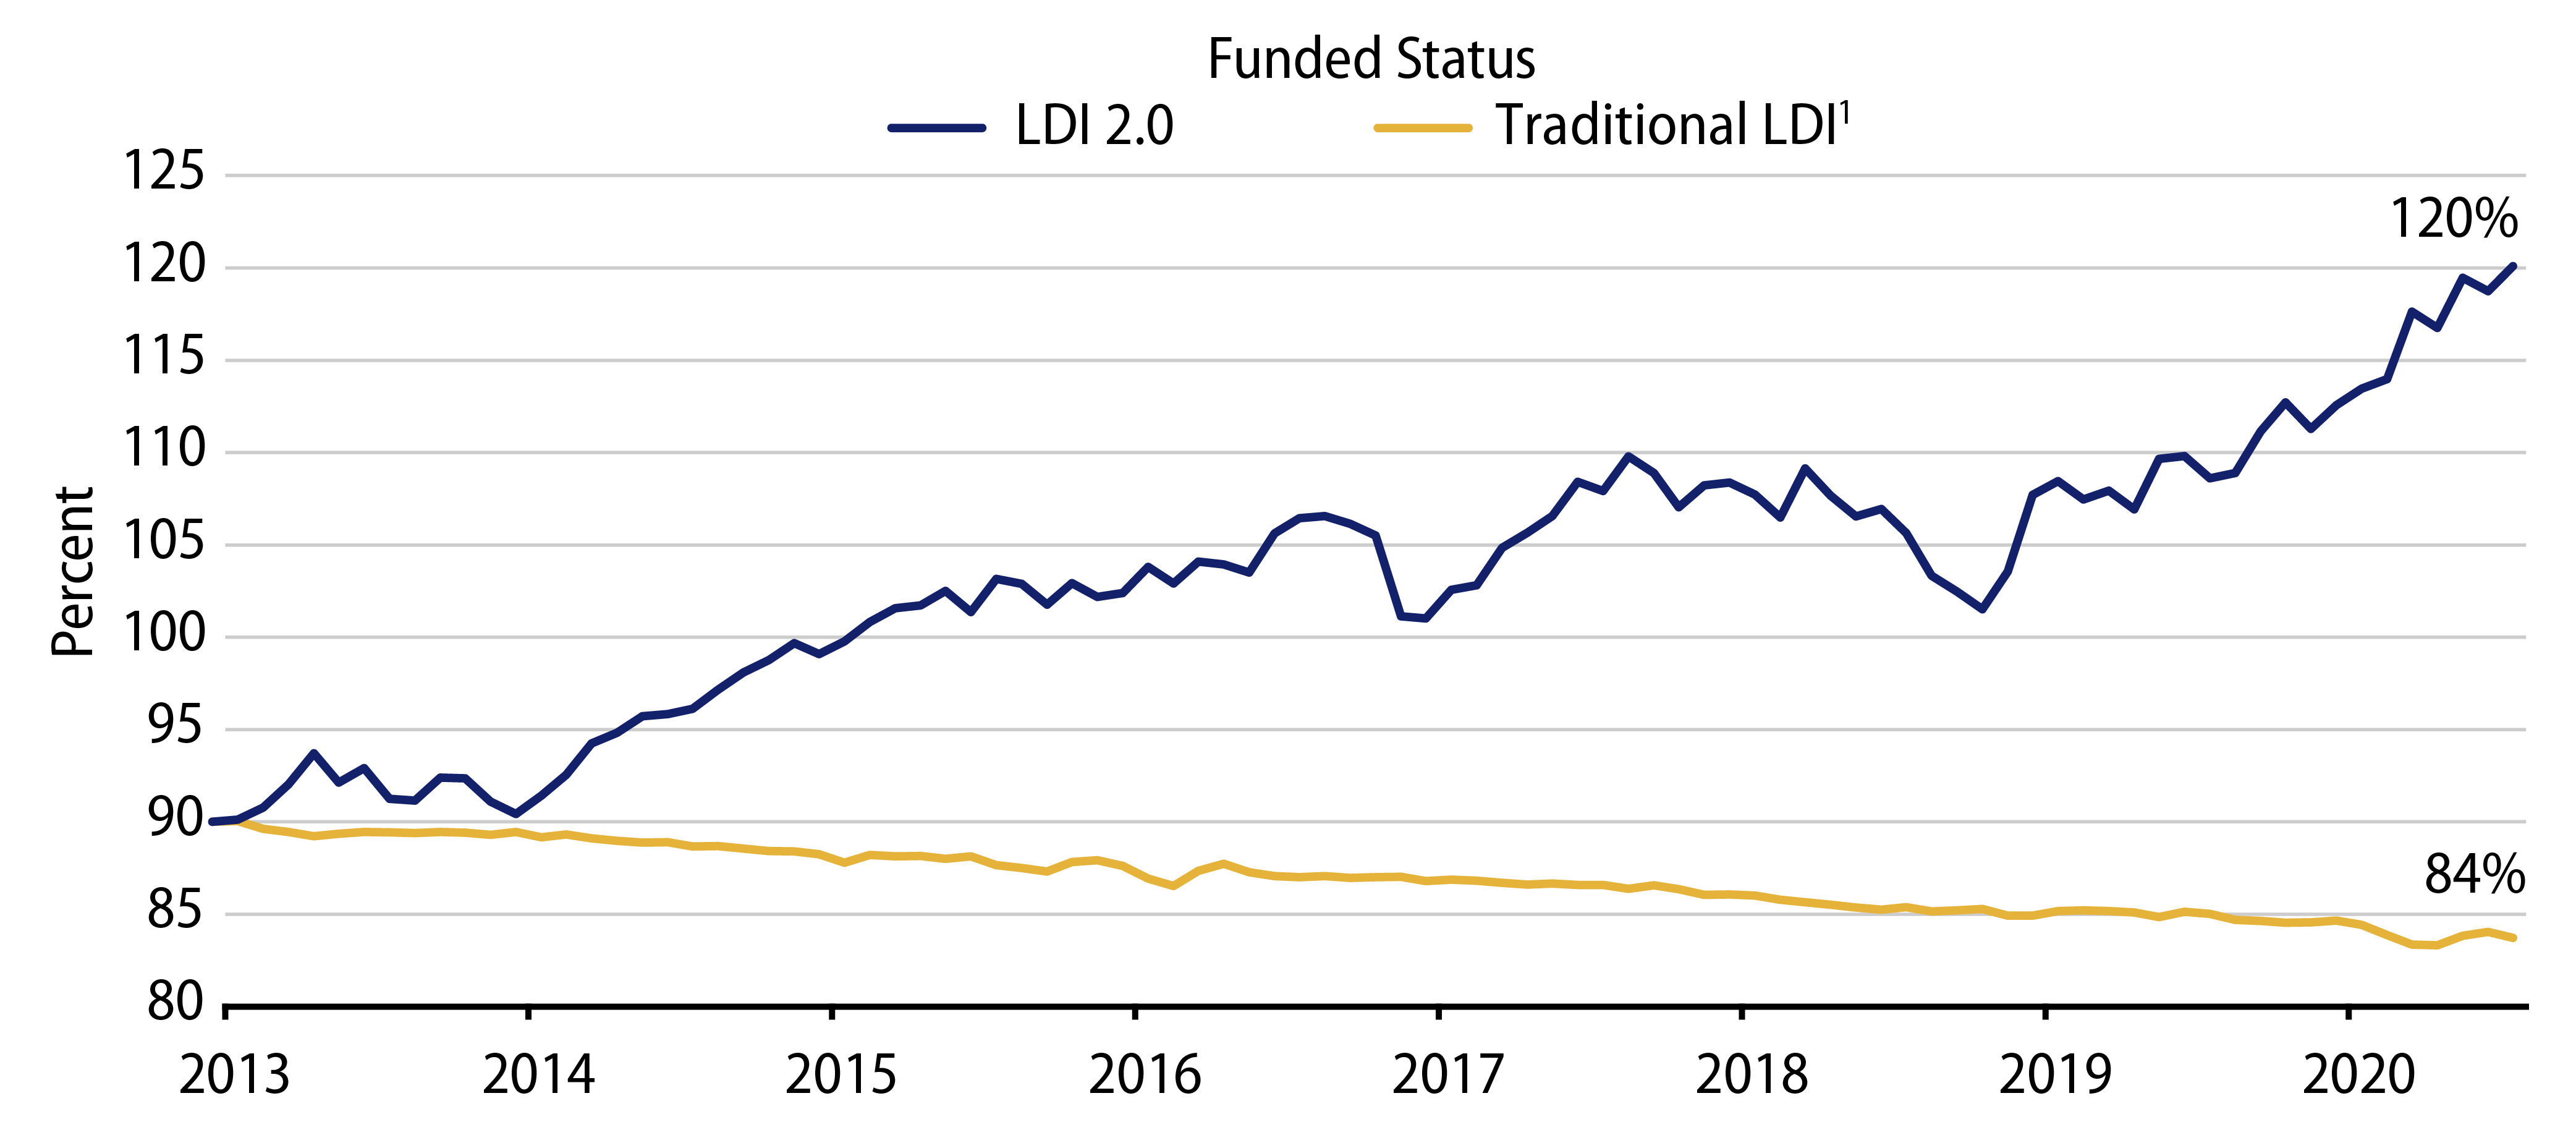 Explore Tracking the Funded Status Using LDI 2.0.